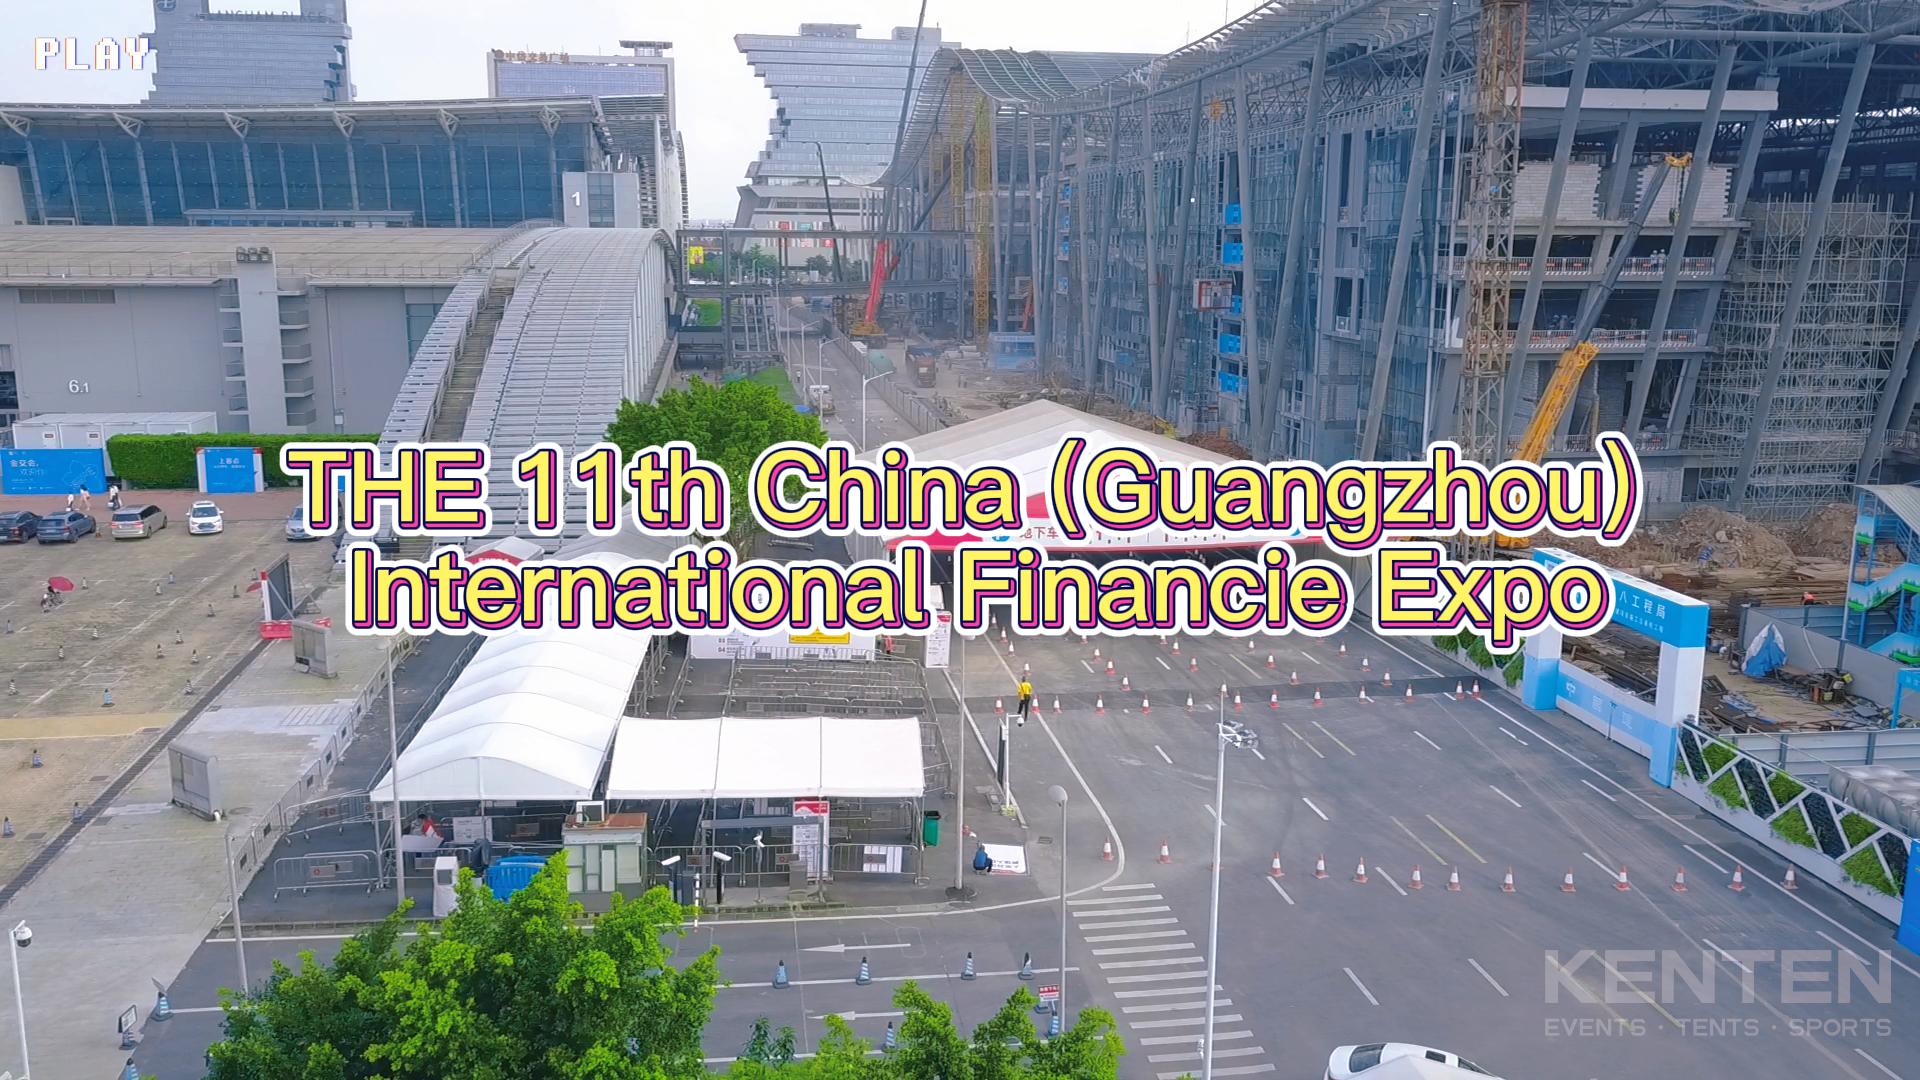 THE 11th China International Financie Expo 2022 - Tent Case Video